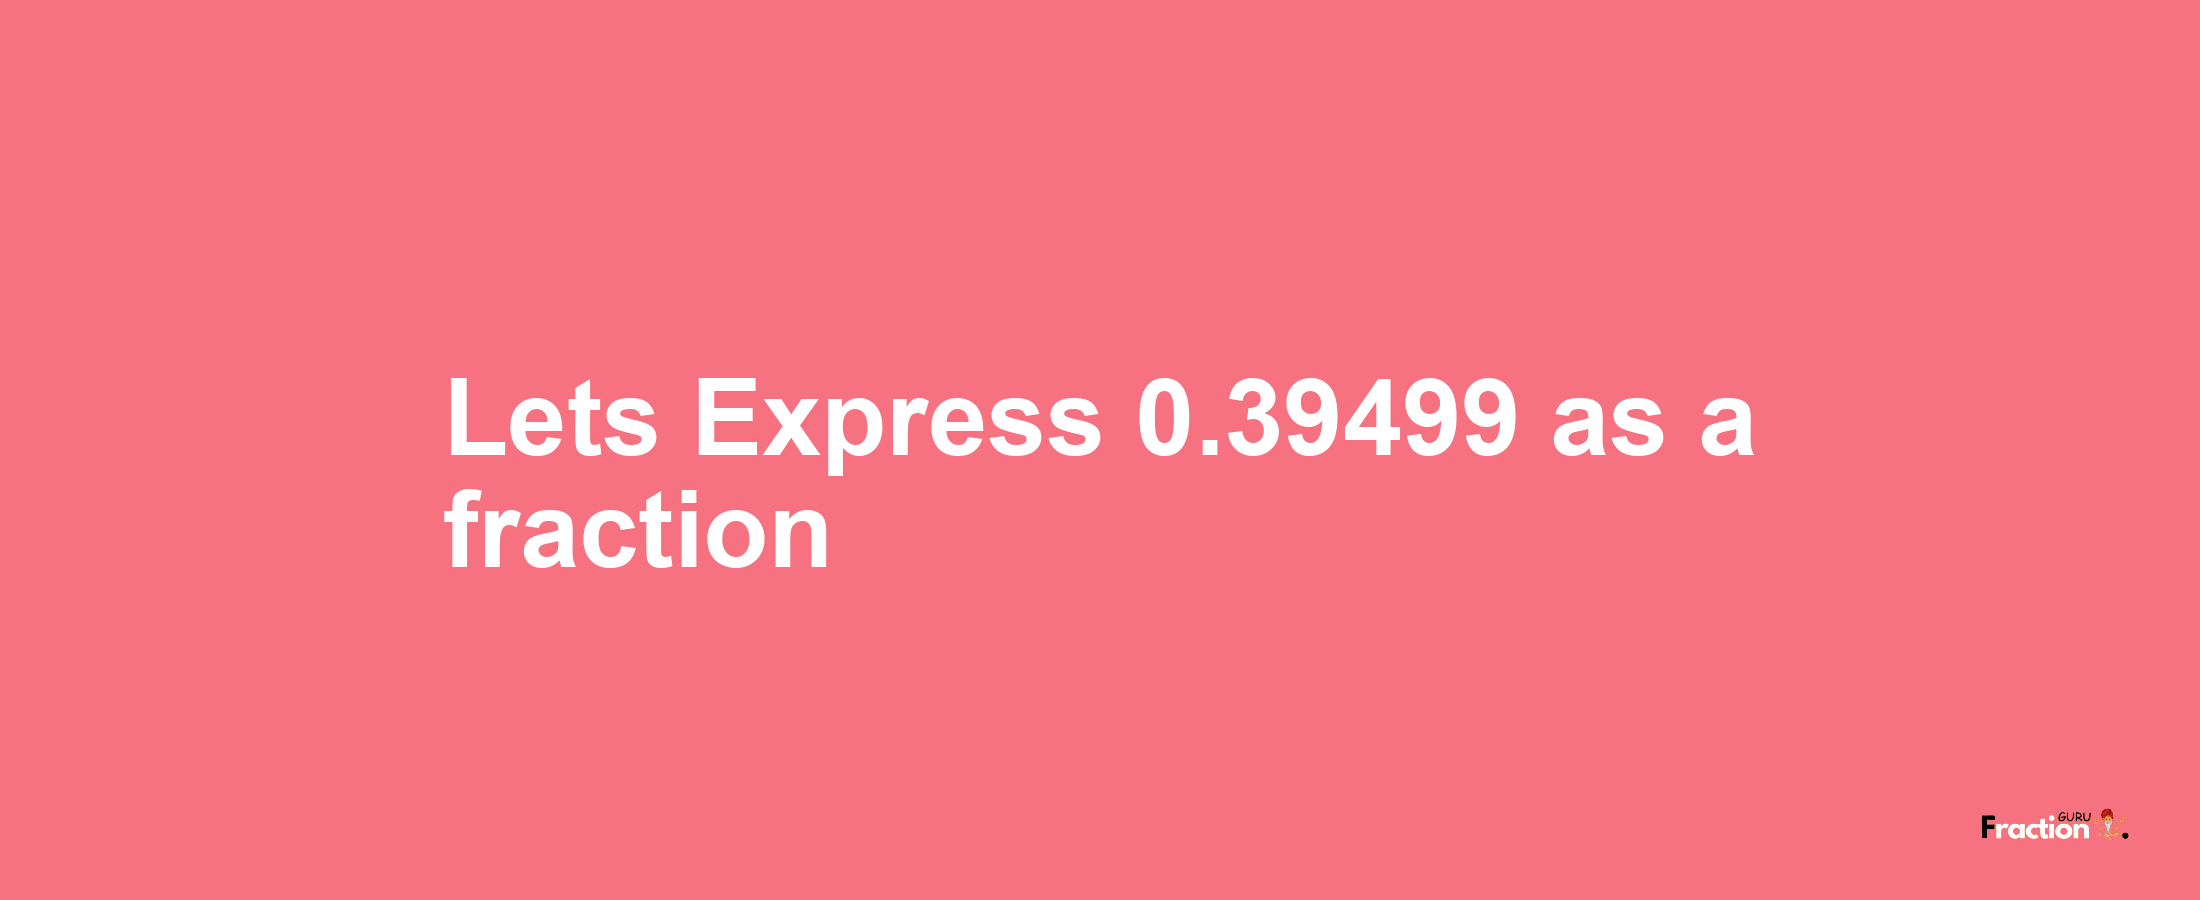 Lets Express 0.39499 as afraction